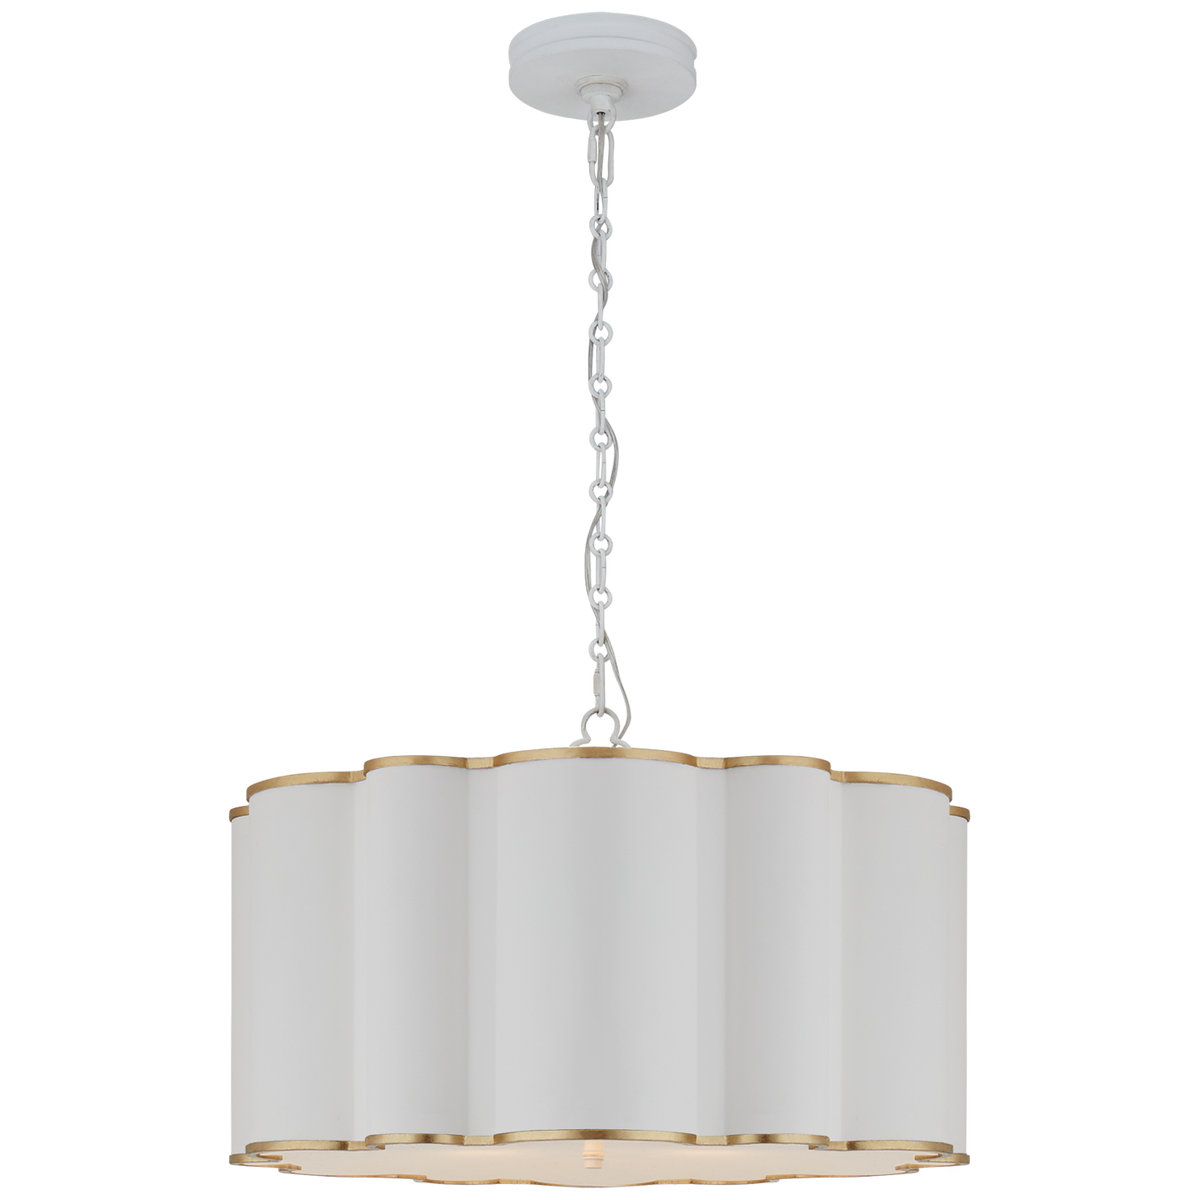 Markos Hanging Shade Large - White and Gild with Frosted Glass